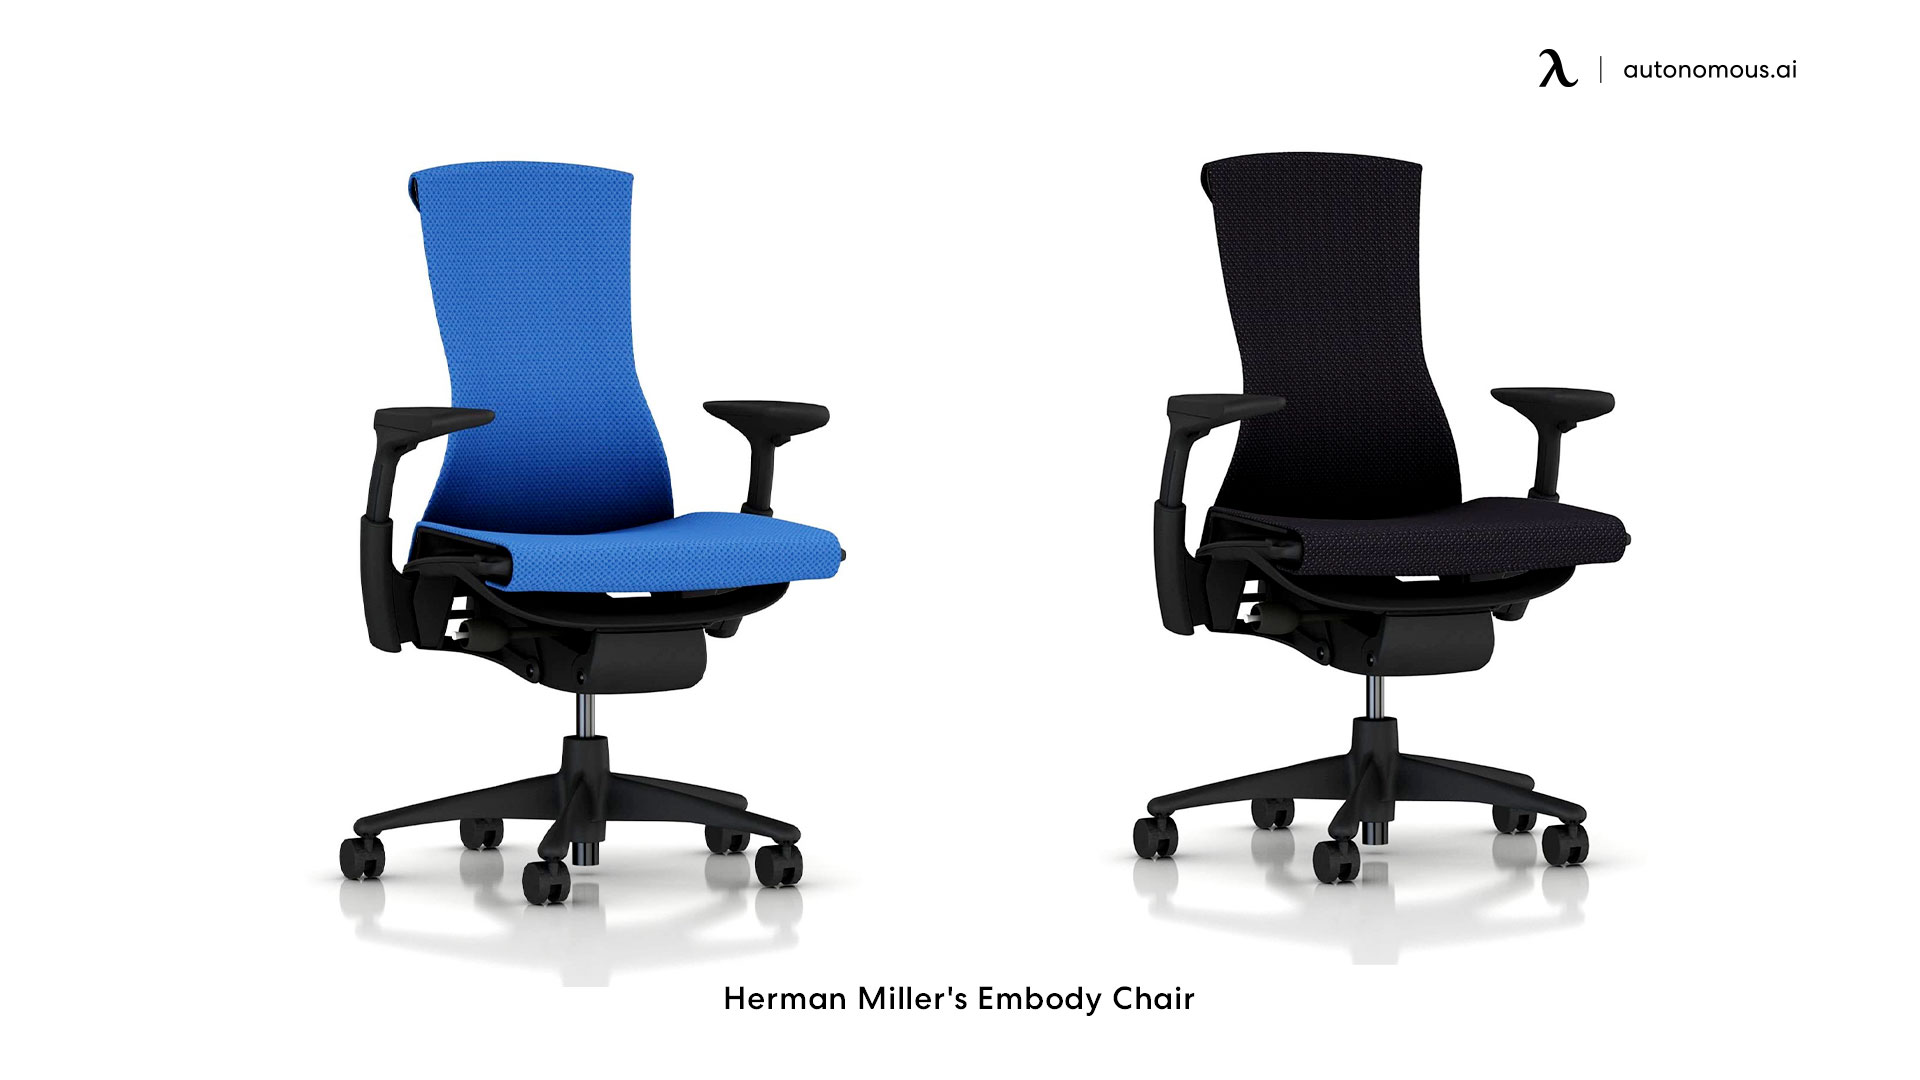 high-back fabric office chair from Herman Miller